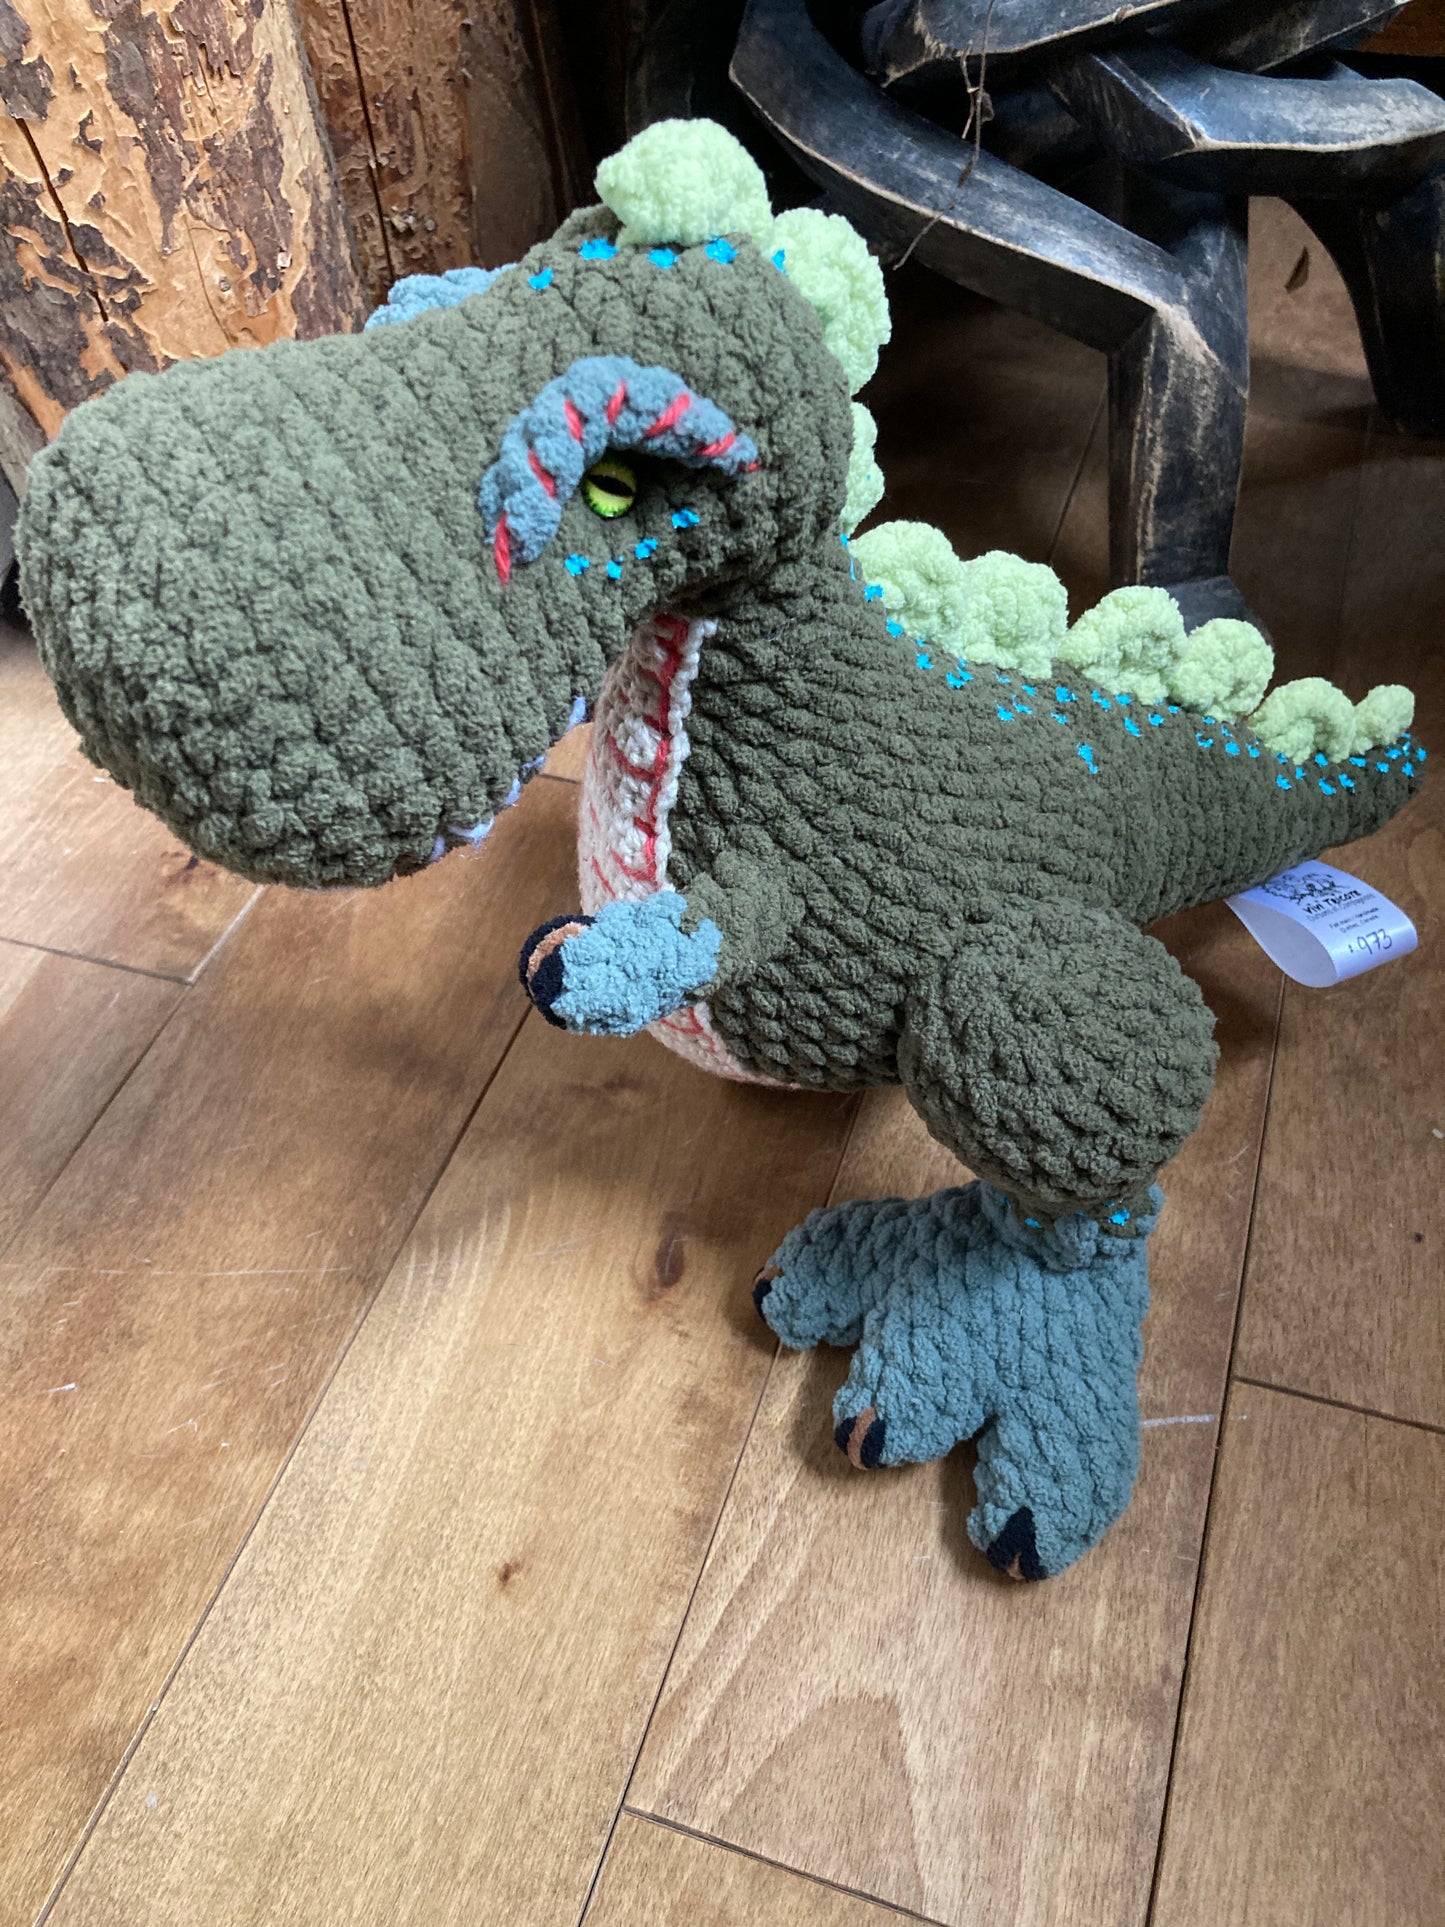 REX THE T-REX with a big belly, can be personalized as a BIRTH DOG